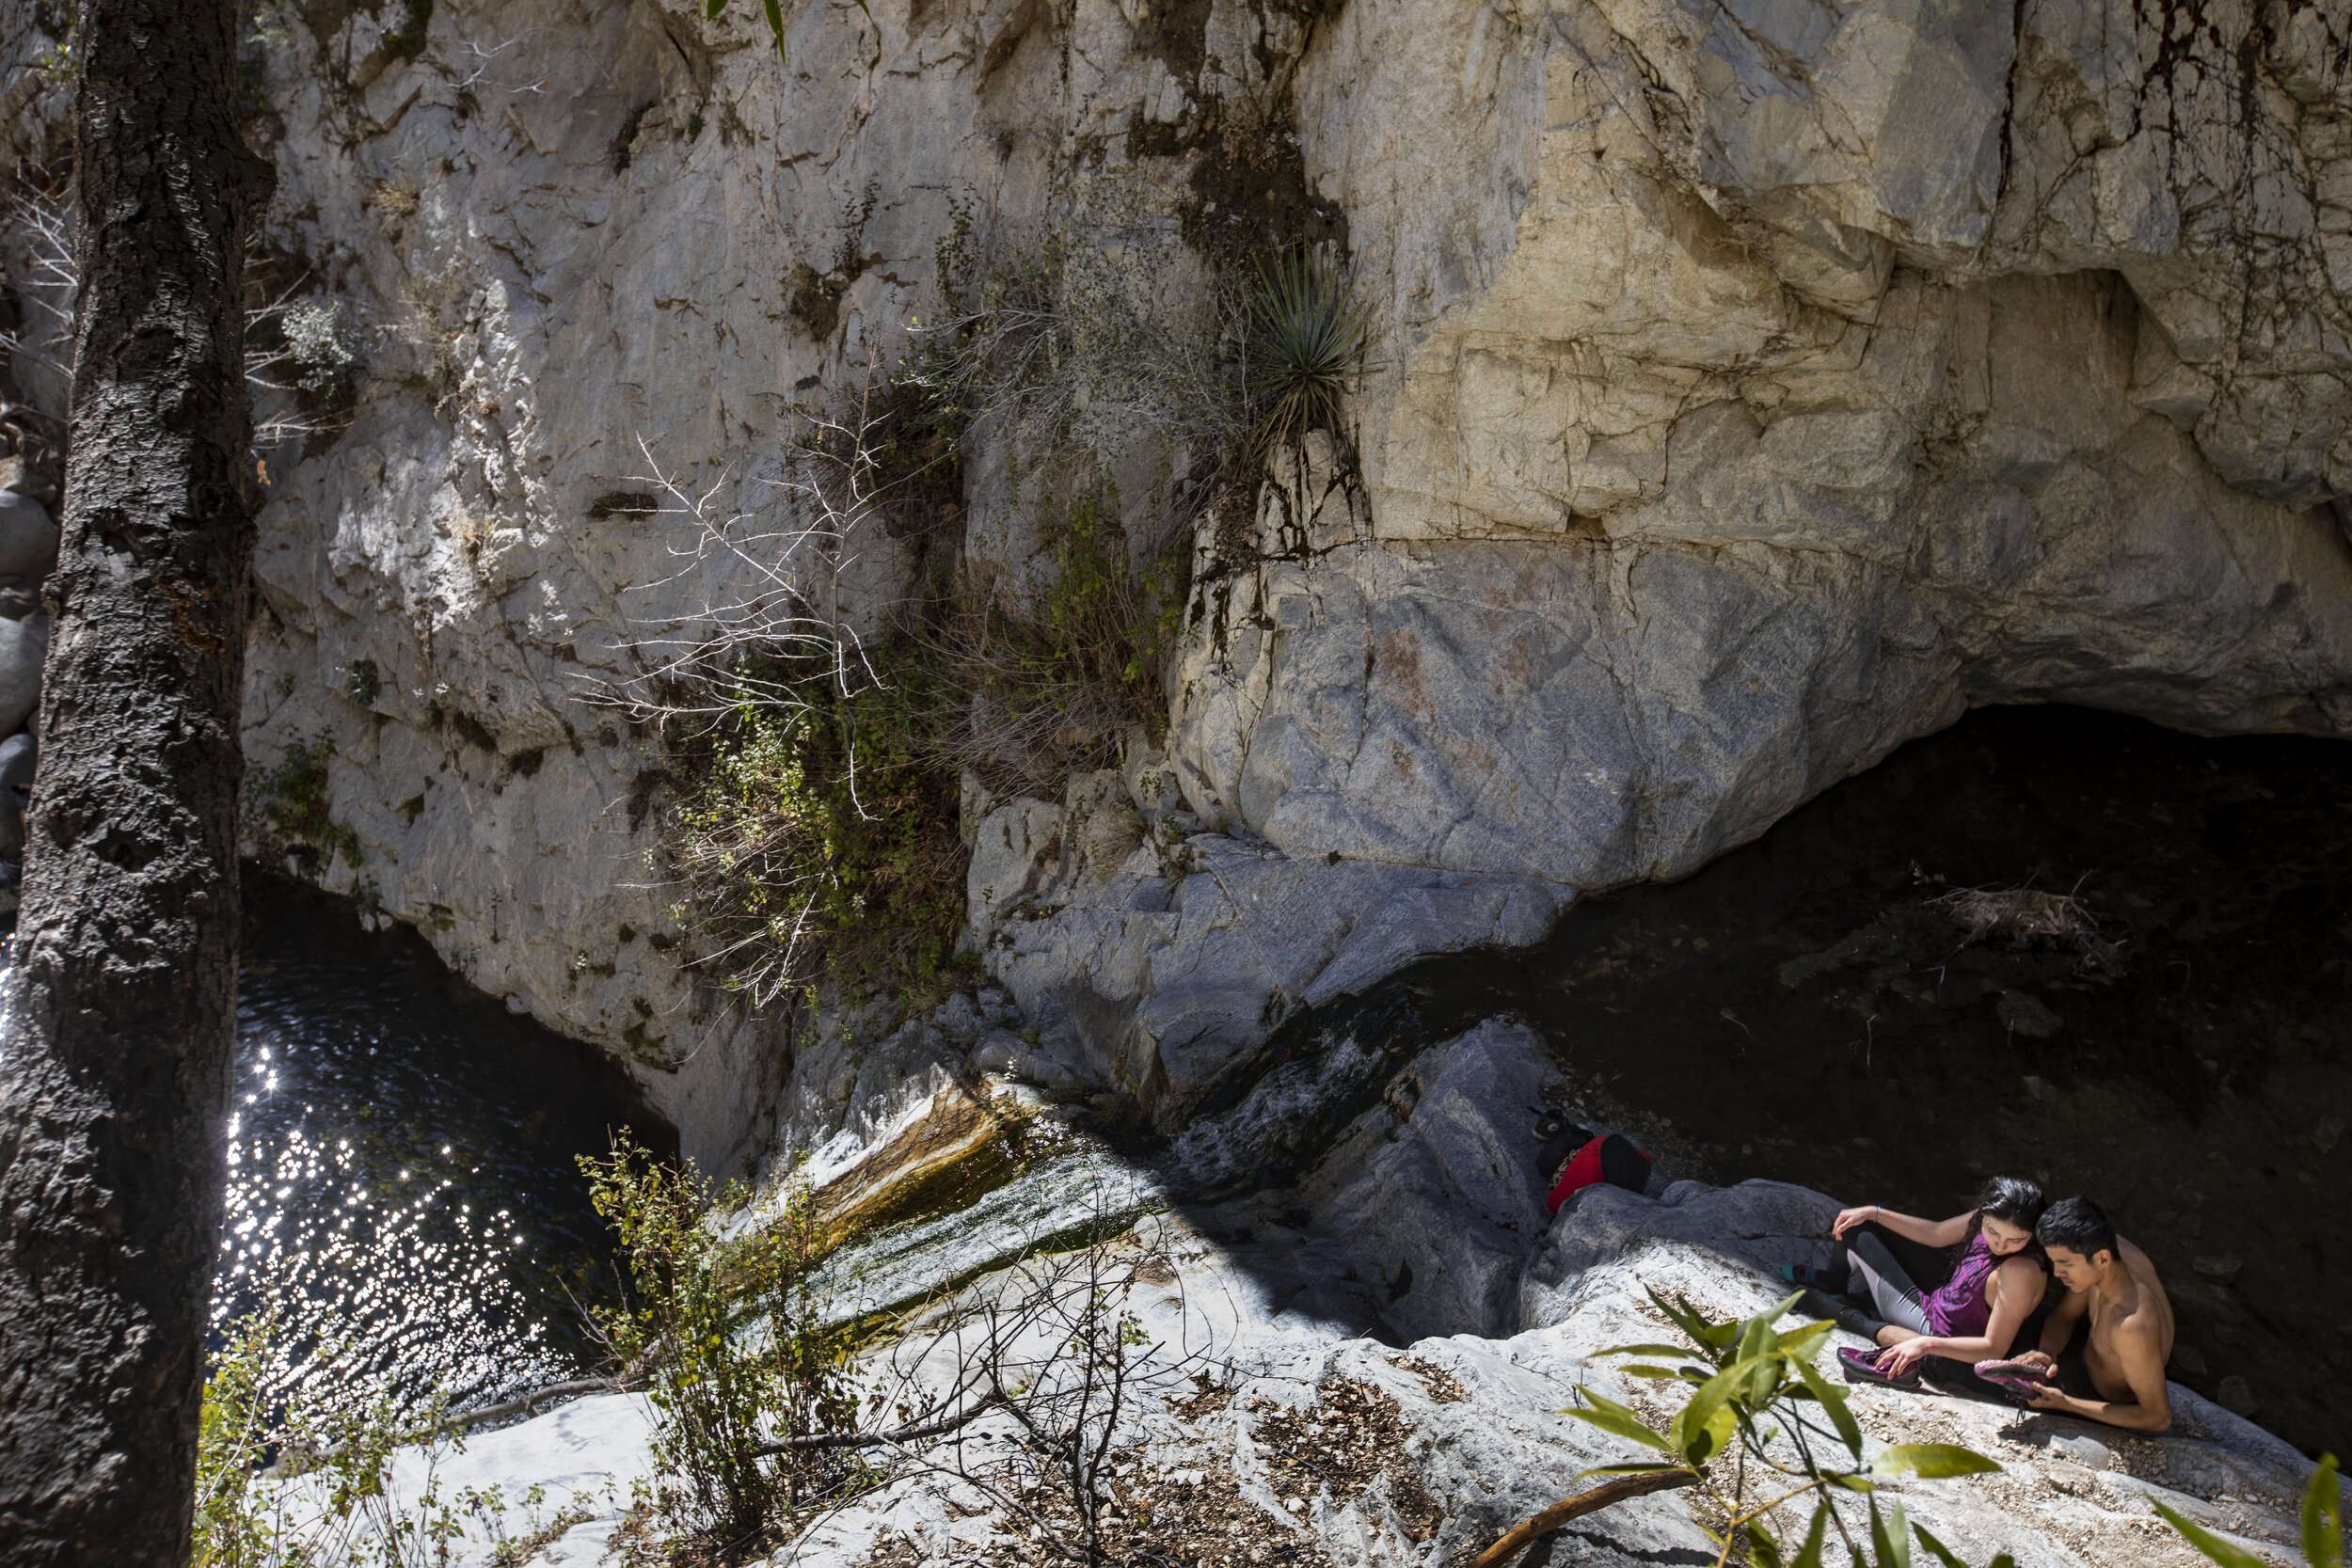  Manuel Ceniceros and Yanette Oseguera take a break from their swim in the pool above the lower falls at Switzer Falls, a popular waterfall hike in the San Gabriel Mountains in Los Angeles County. 